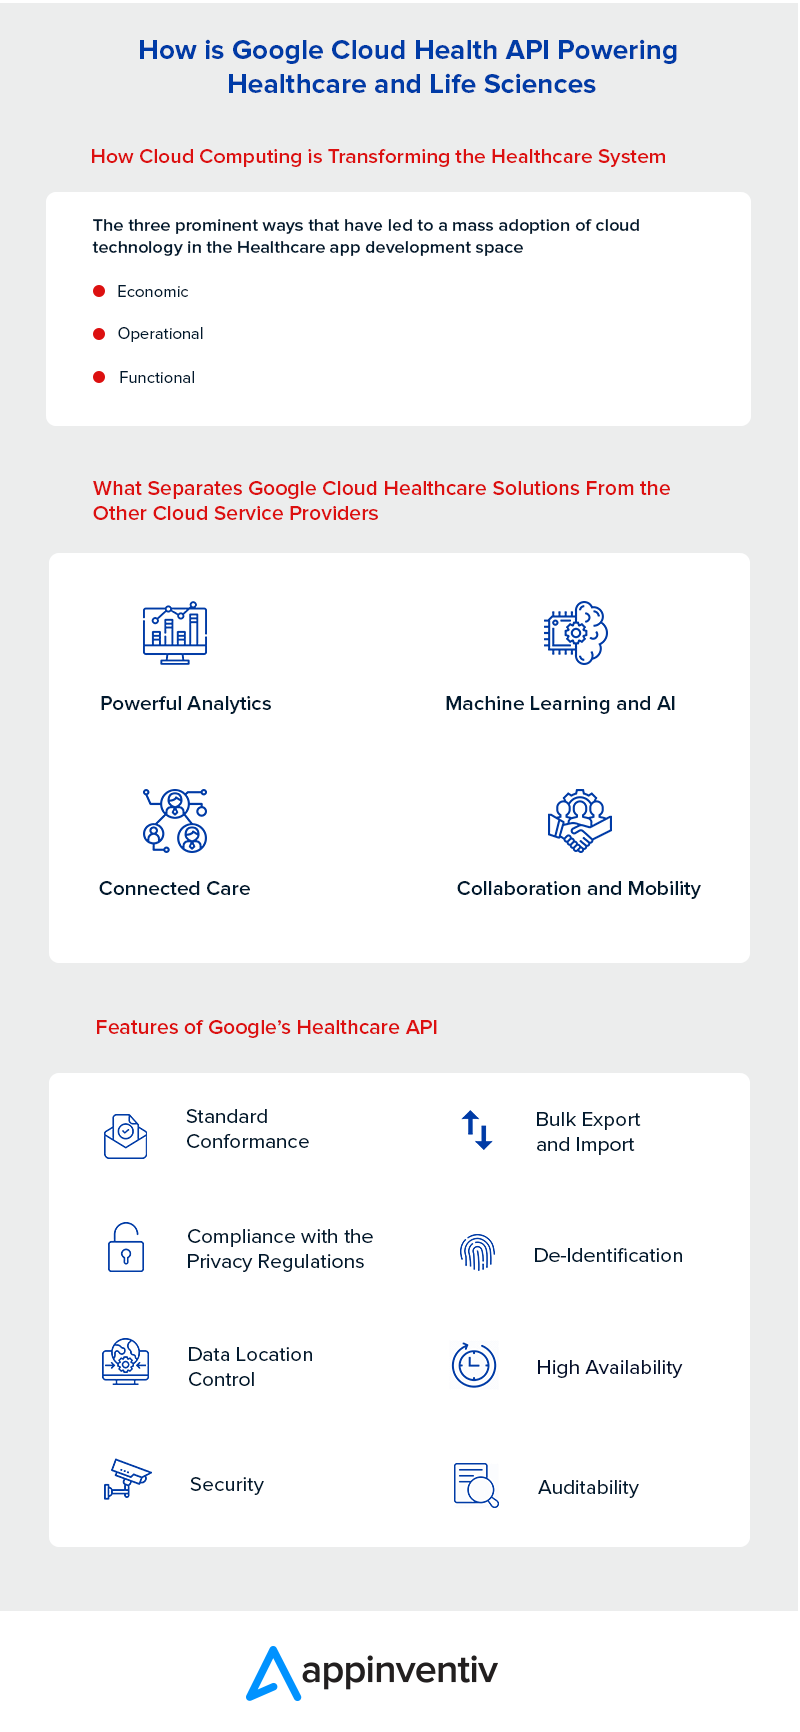 How is Google Cloud Health API Powering Healthcare and Life Sciences?